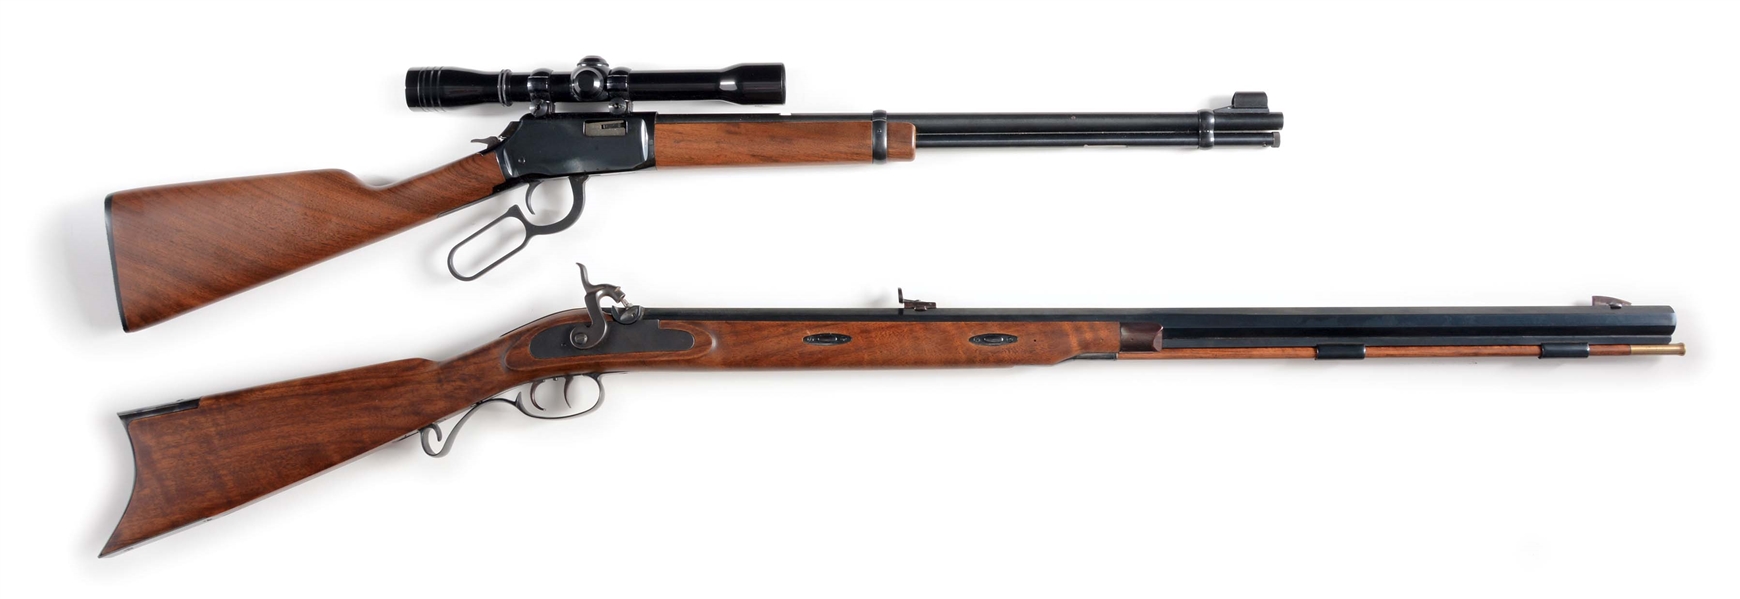 (M+A) TWO AMERICAN CLASSIC RIFLES: A WINCHESTER MODEL 9422M AND LYMAN HALF STOCK RIFLE.